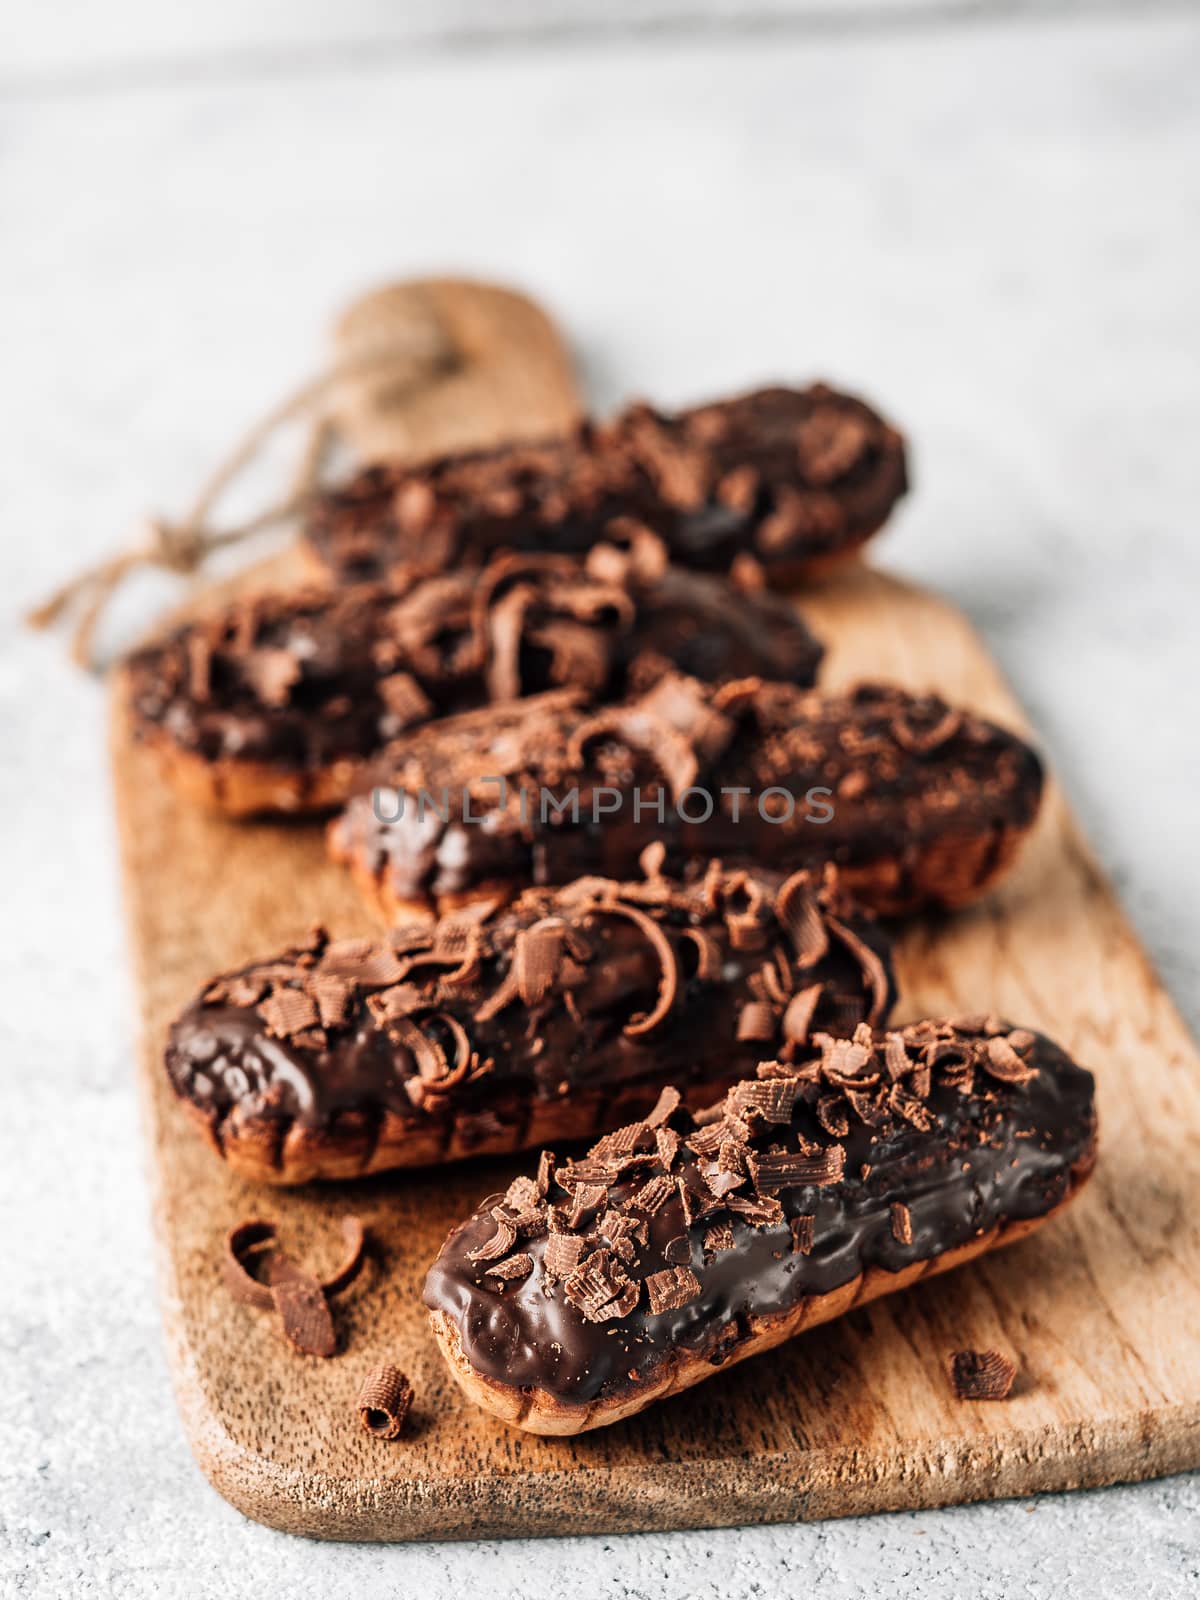 Homemade eclairs with chocolate on wooden cutting board. Close up view of delicious healthy profitroles with chocolate glaze. Copy space for text or design. Vertical.